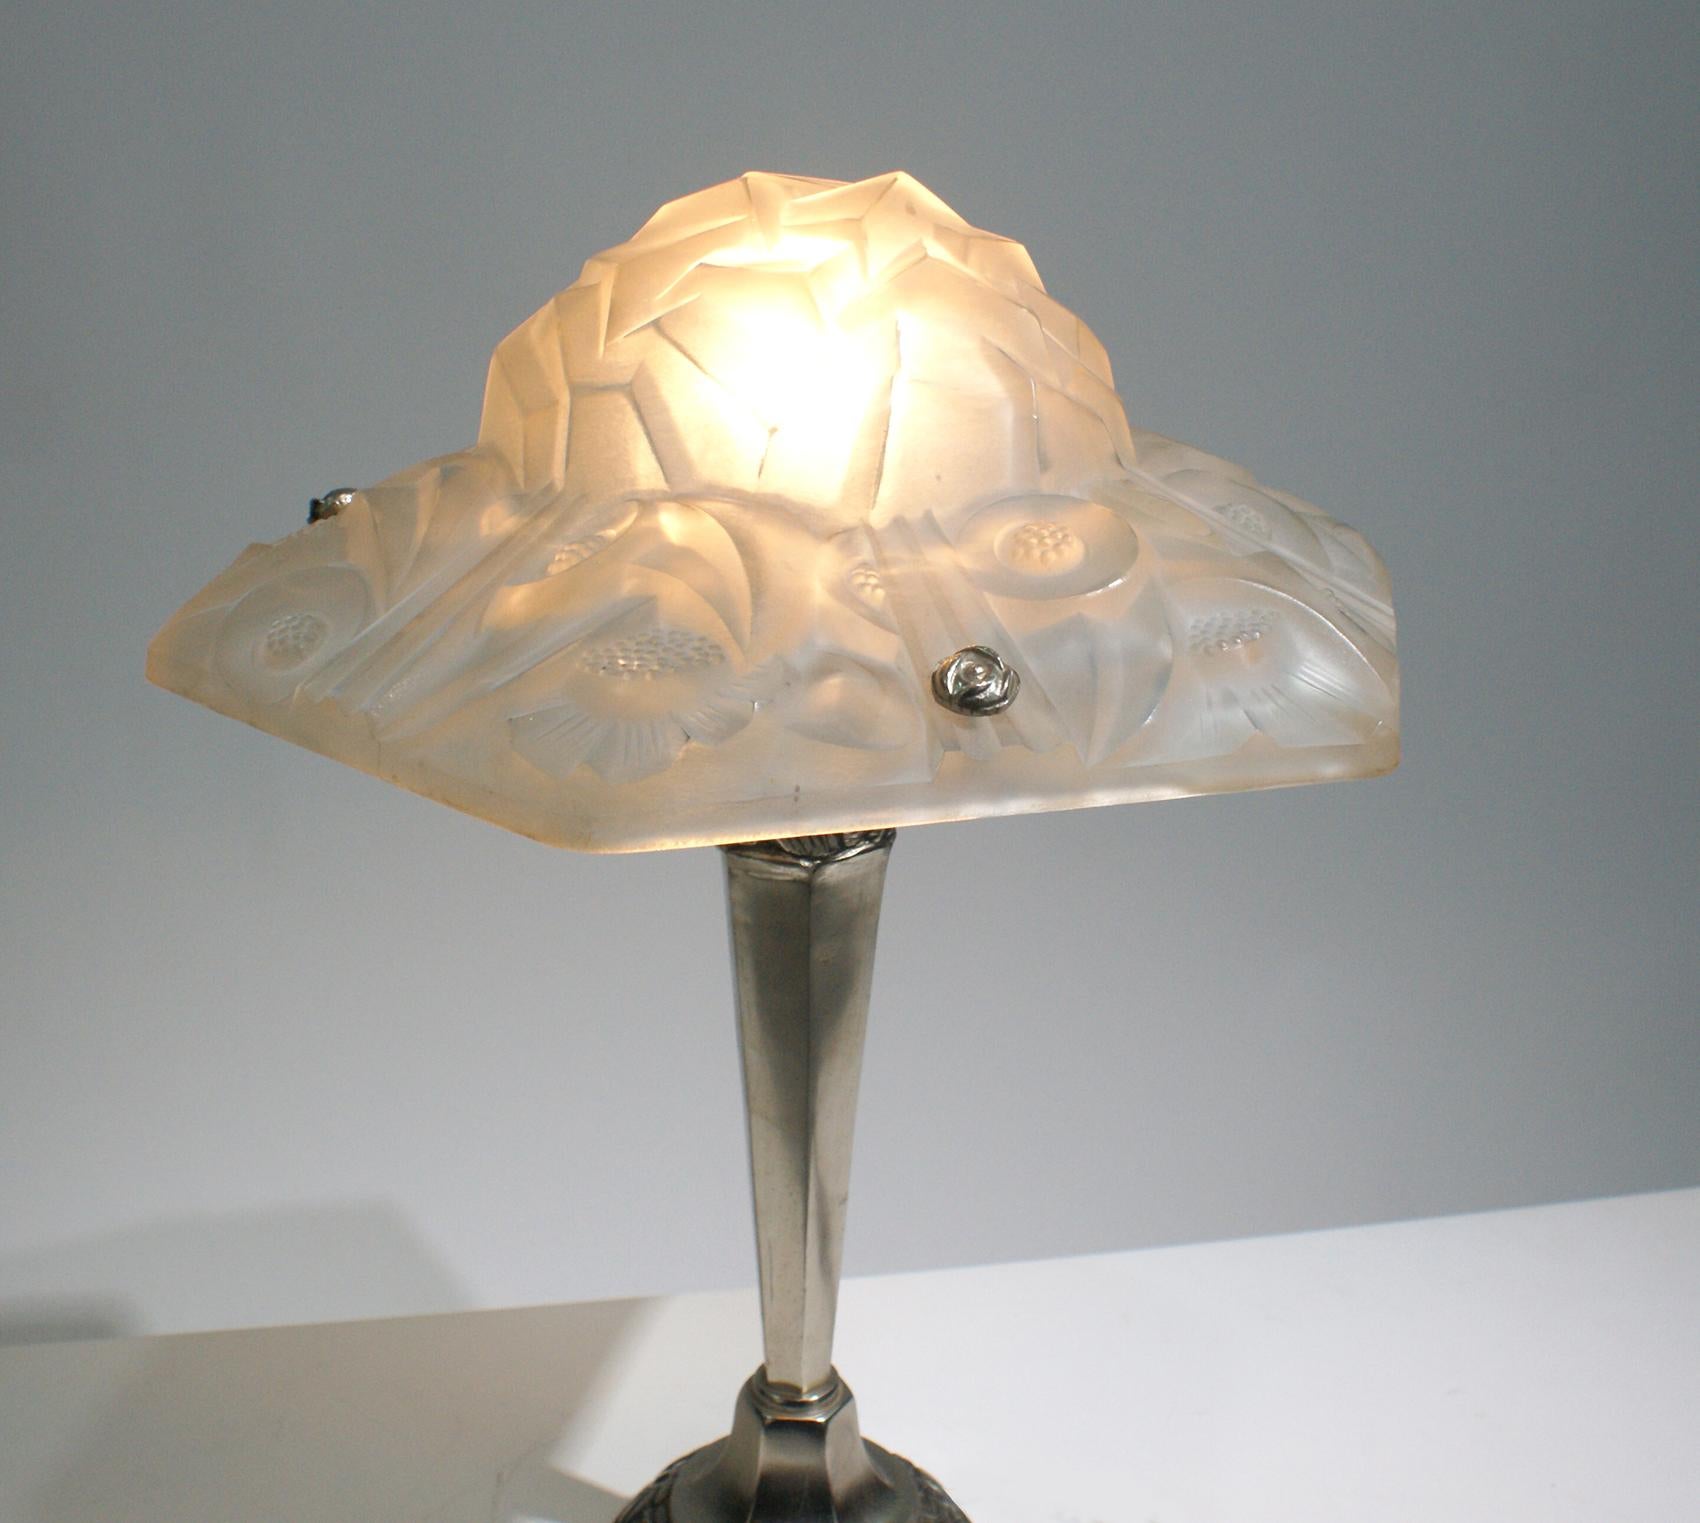 Stunning French Art Deco table lamp signed by “Degue”. Having frosted geometric and floral motif design in relief including “Degué” signature on the glass shade shaped like a hat. Resting on matching floral nickeled bronze column.
The table lamp